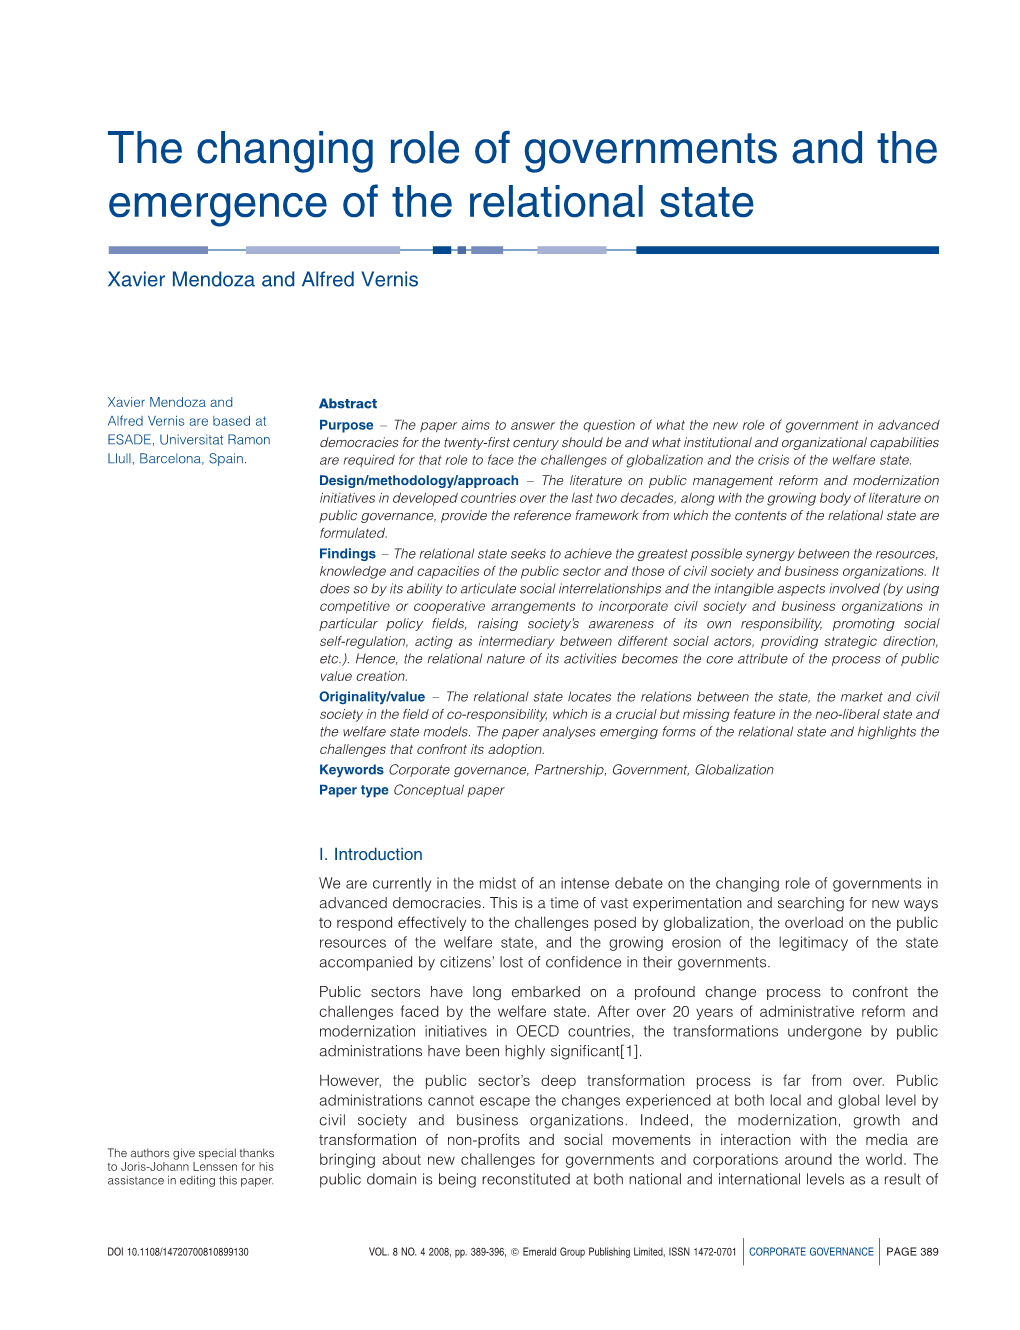 The Changing Role of Governments and the Emergence of the Relational State